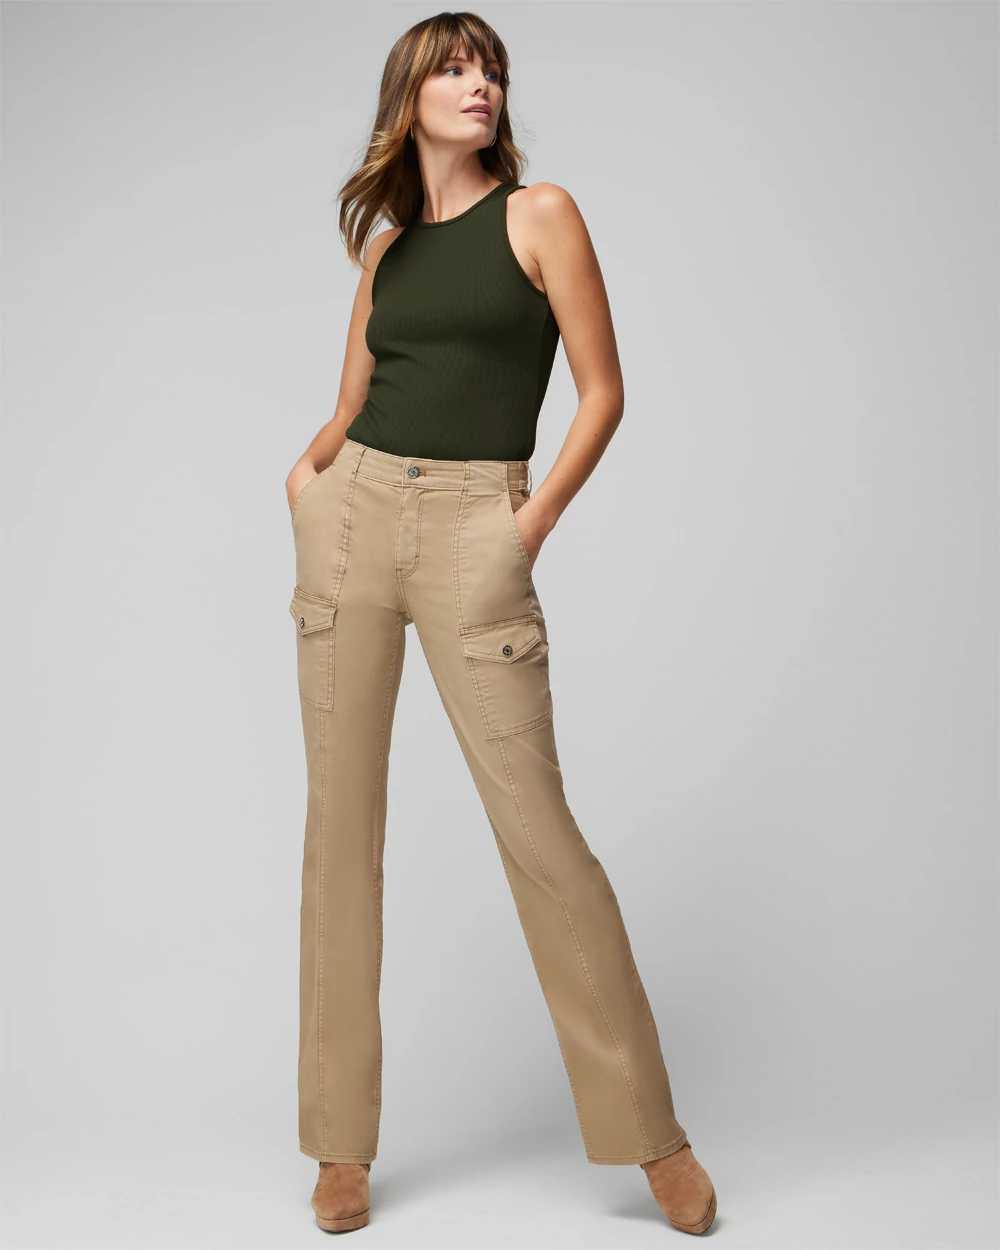 High Rise Pret Cargo Skinny Flare Jeans click to view larger image.